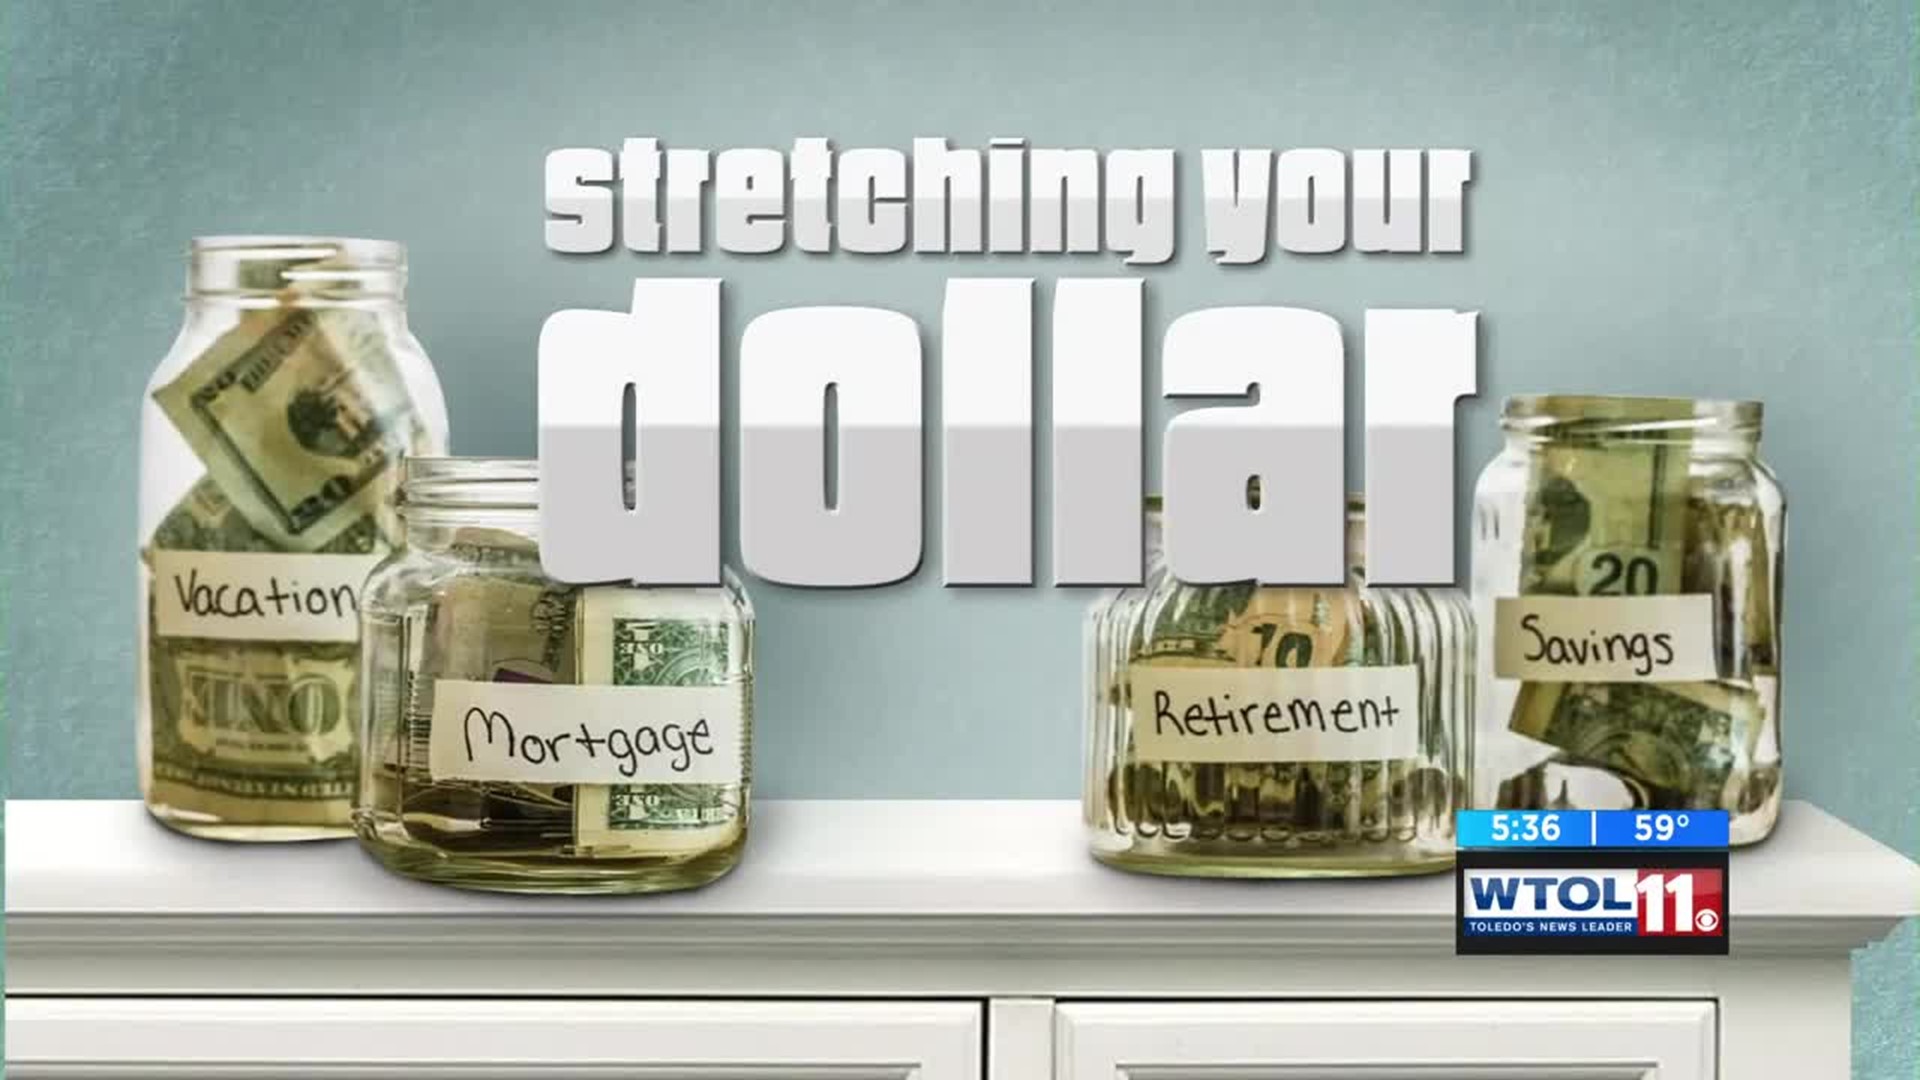 Stretching your dollar